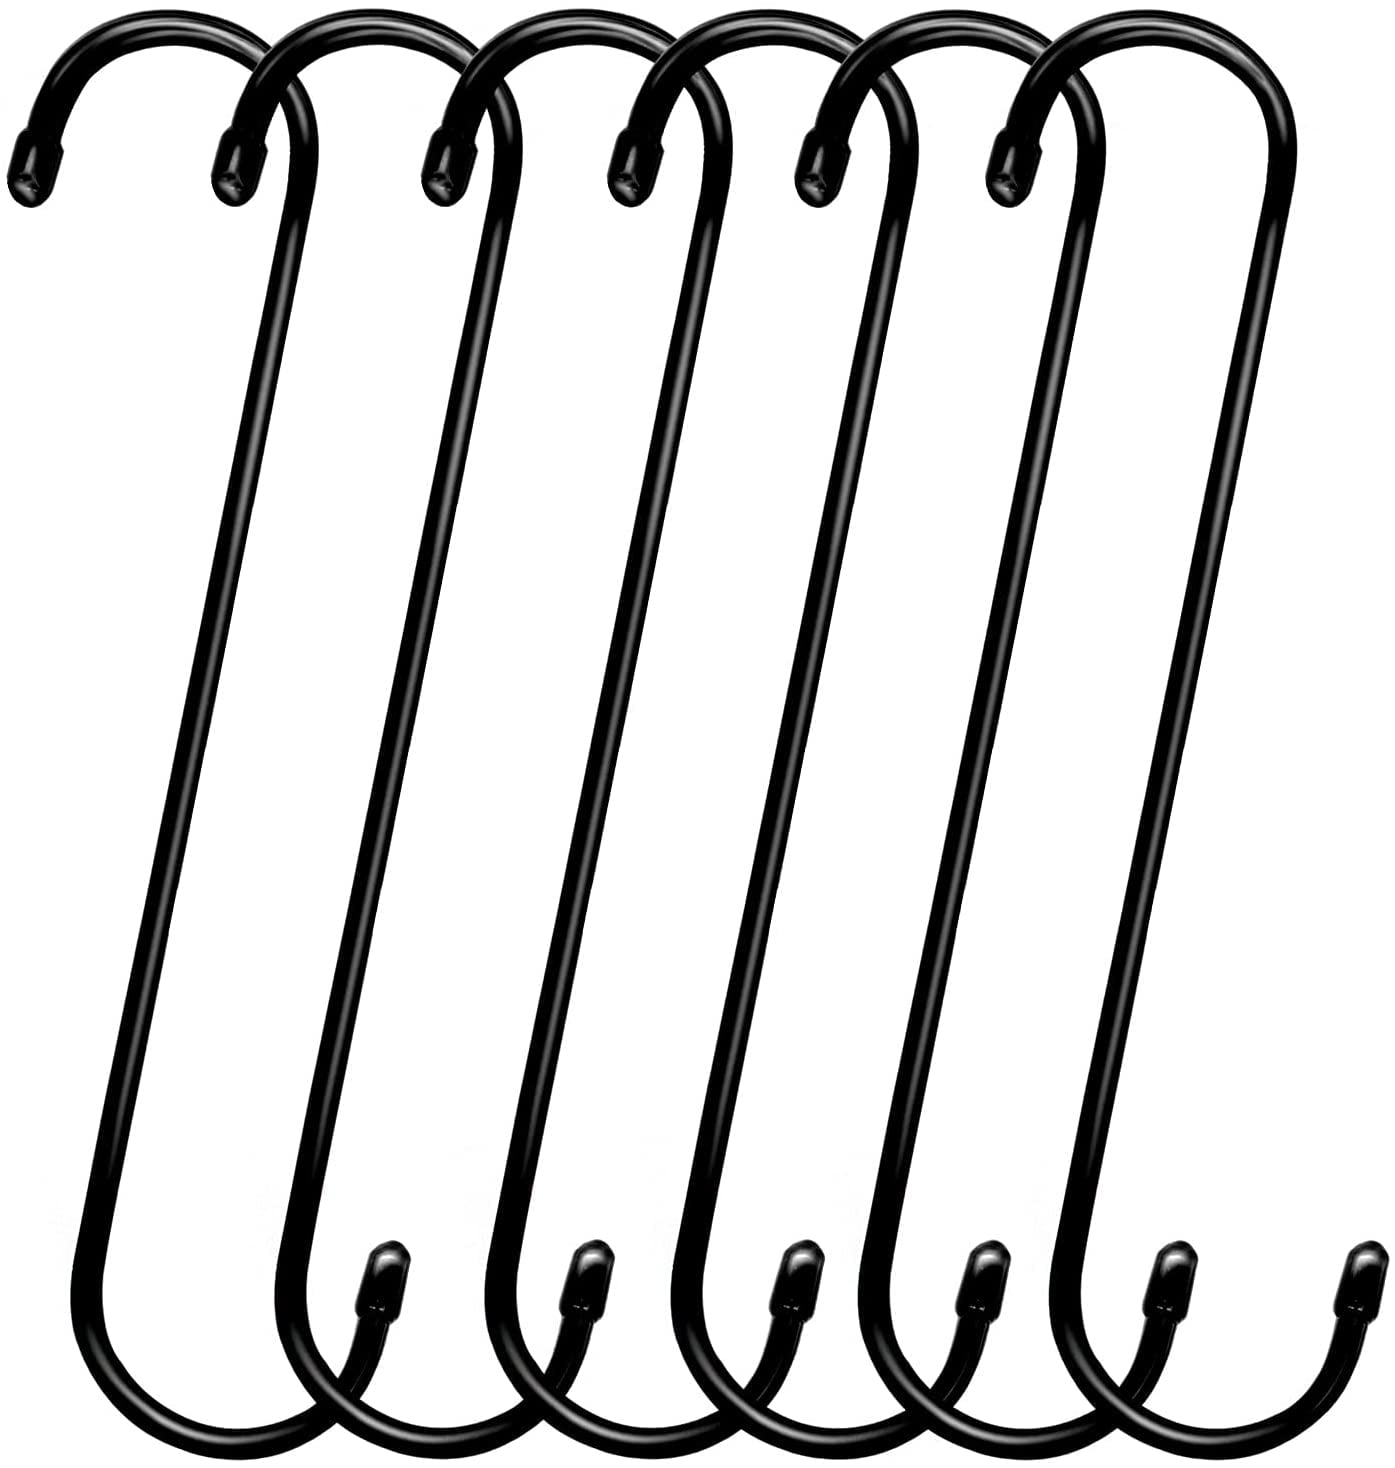  8 Pack S Hooks Heavy Duty 12 Inch Large S Shape Hooks for  Hanging Plant Pots and Pans Steel Metal Hanger Hooks Black Long S-Hooks for  Hanging Clothes, Plants, bird feeders